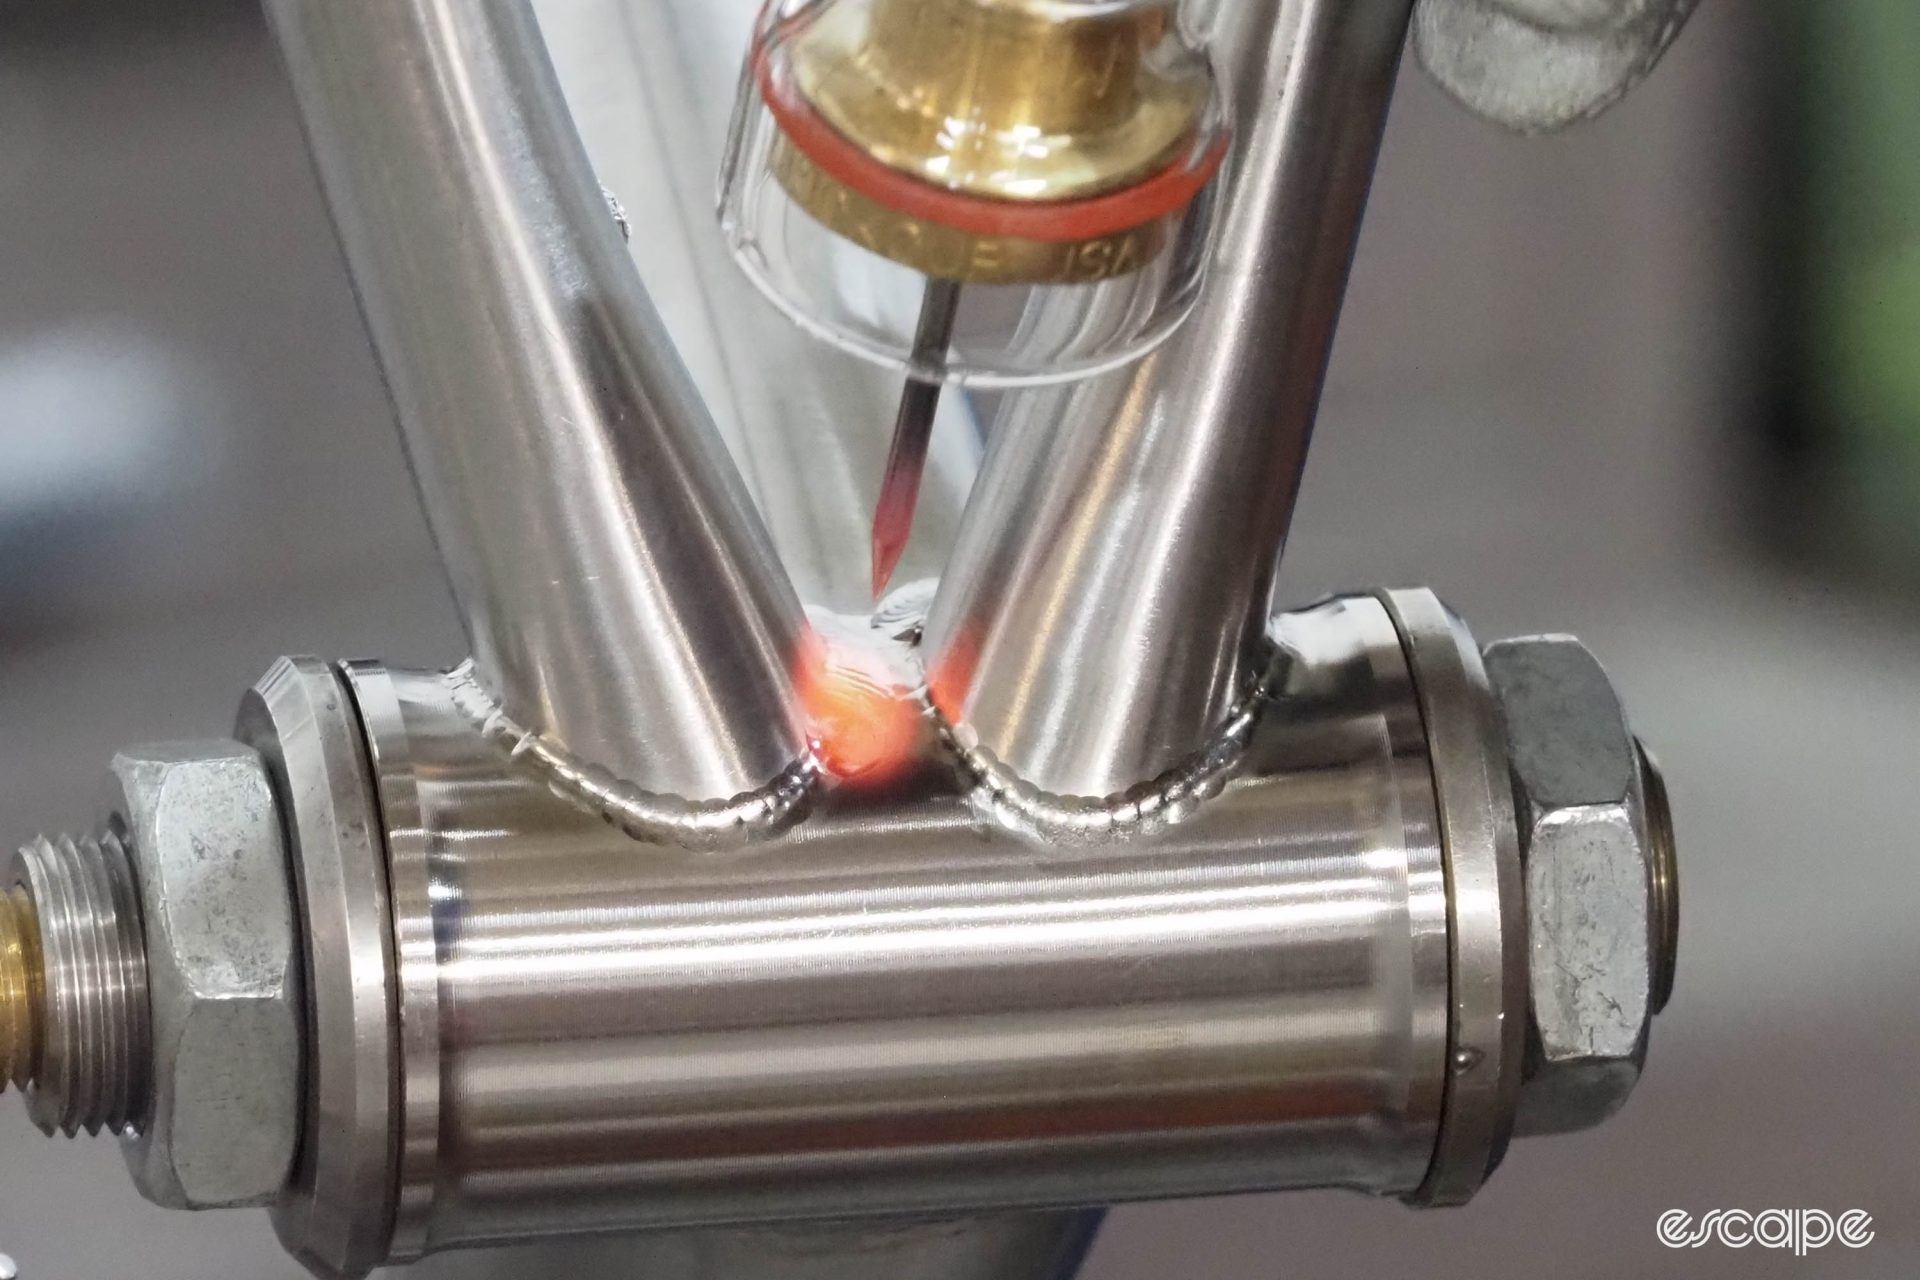 A fusion weld on a bottom bracket. The welds are puddled but raw, and the frame glows red where the chainstay meets the bottom bracket shell as the welder passes.